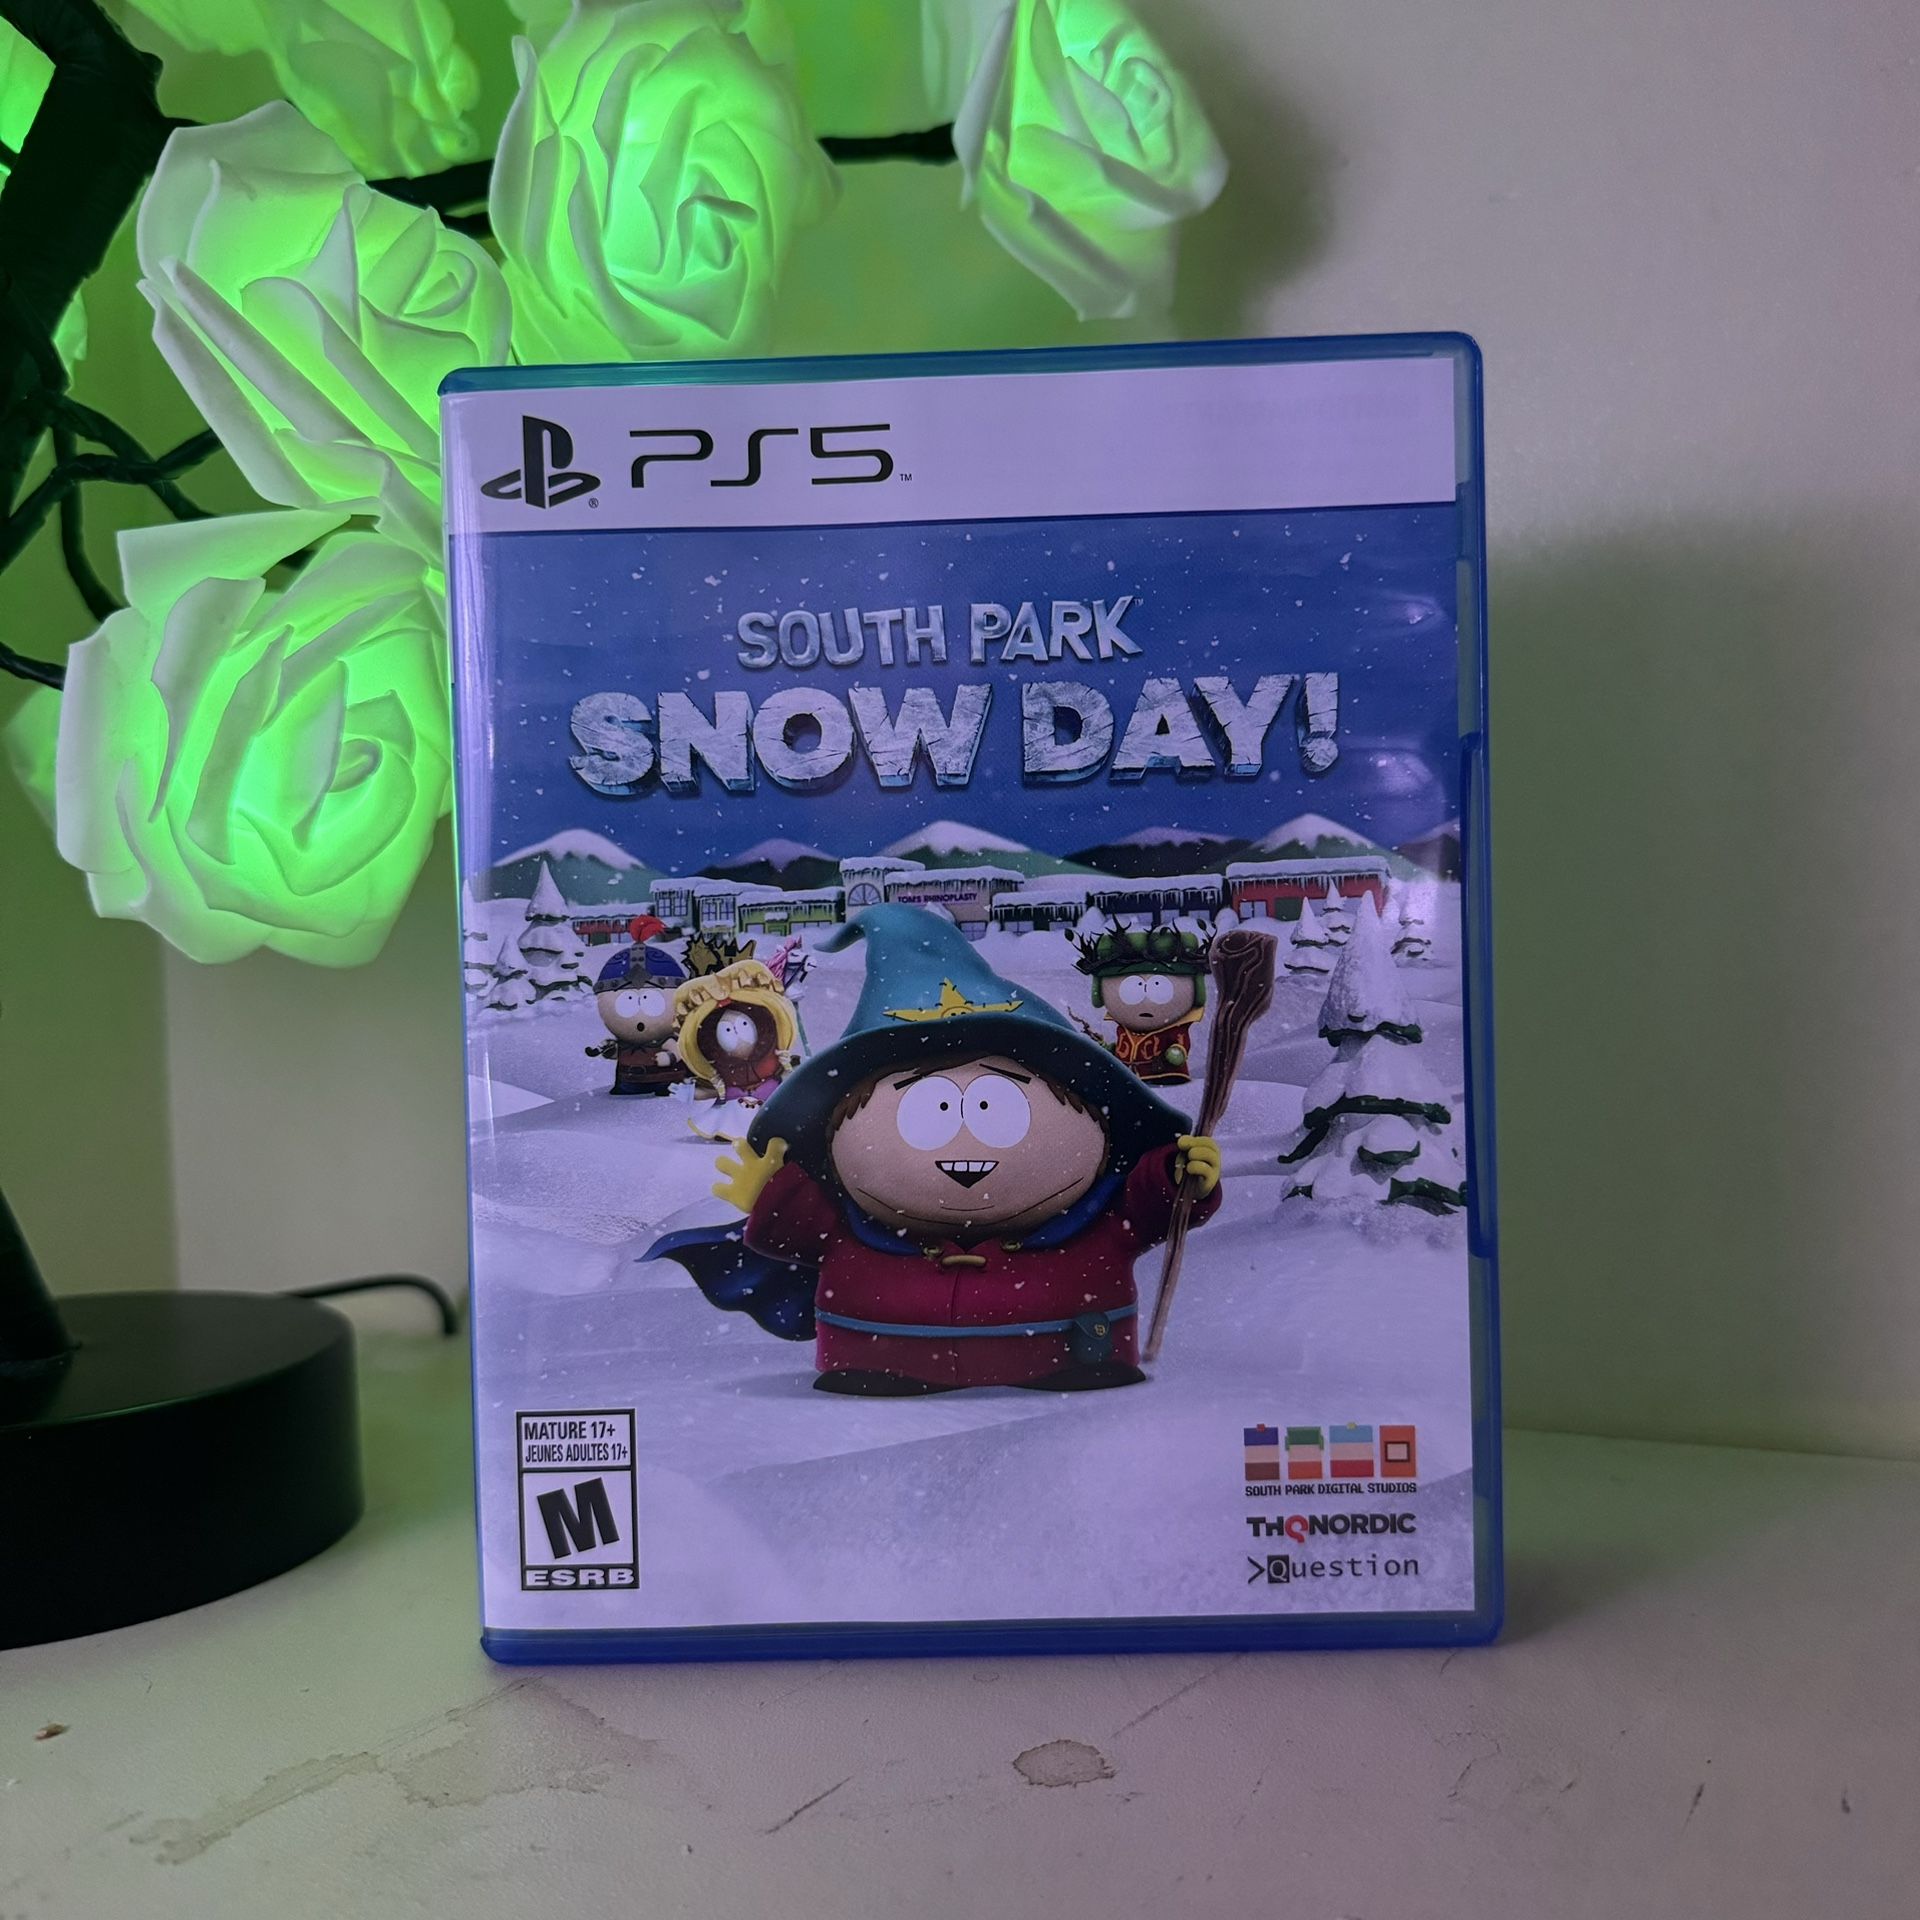 South Park Ps5 Snow Day